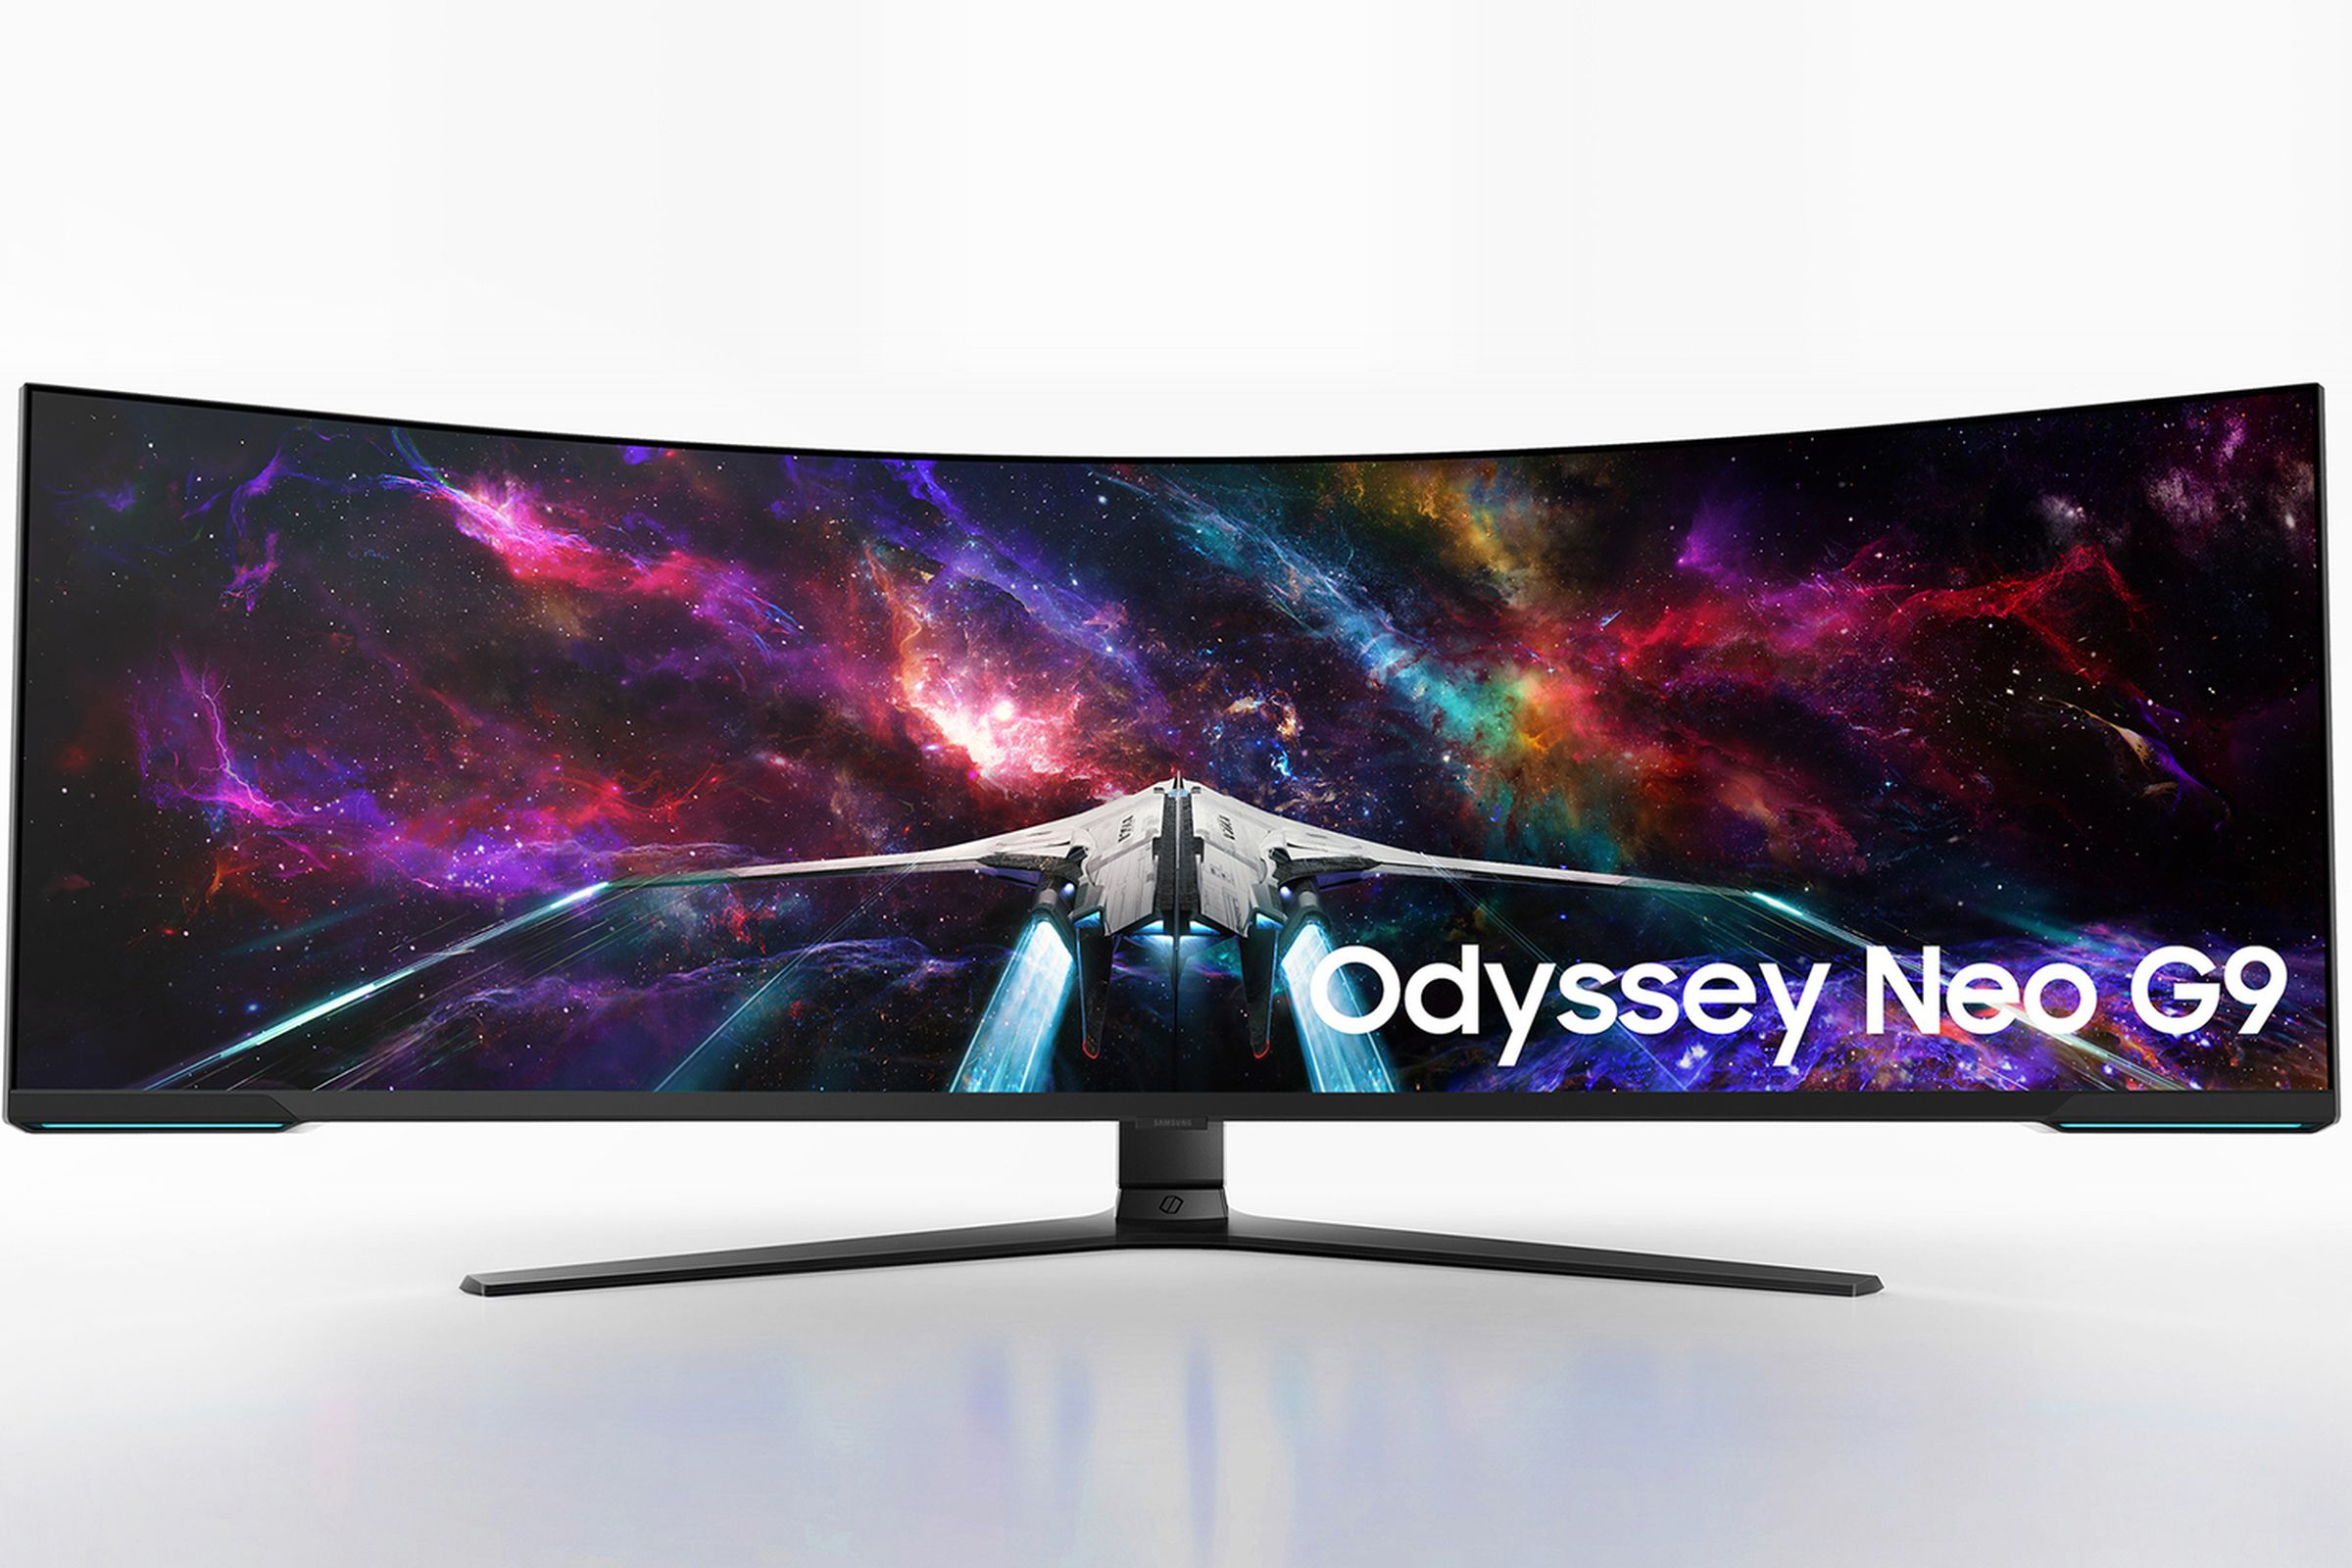 Picture of the Odyssey Neo G9.